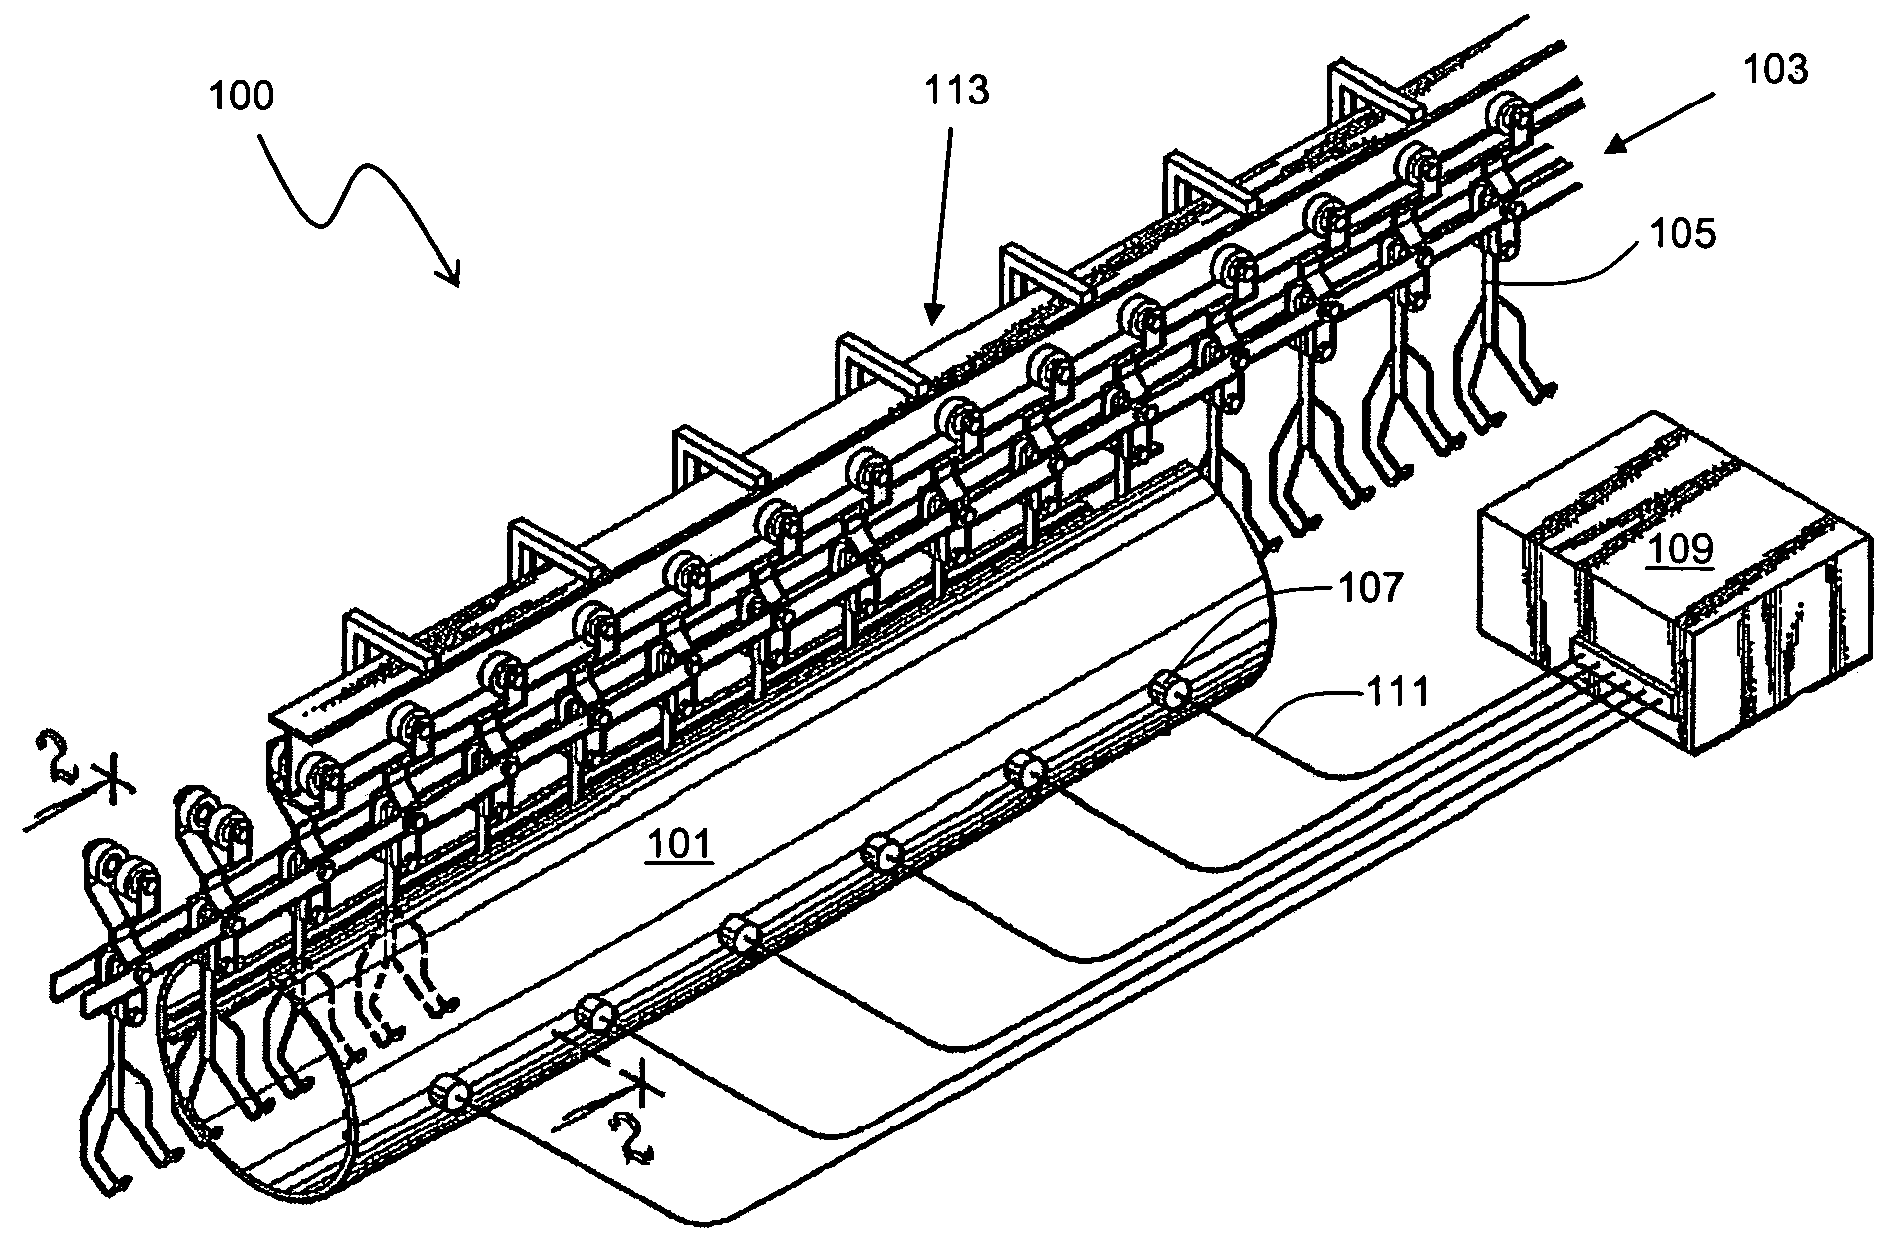 Poultry incapacitator and method of use